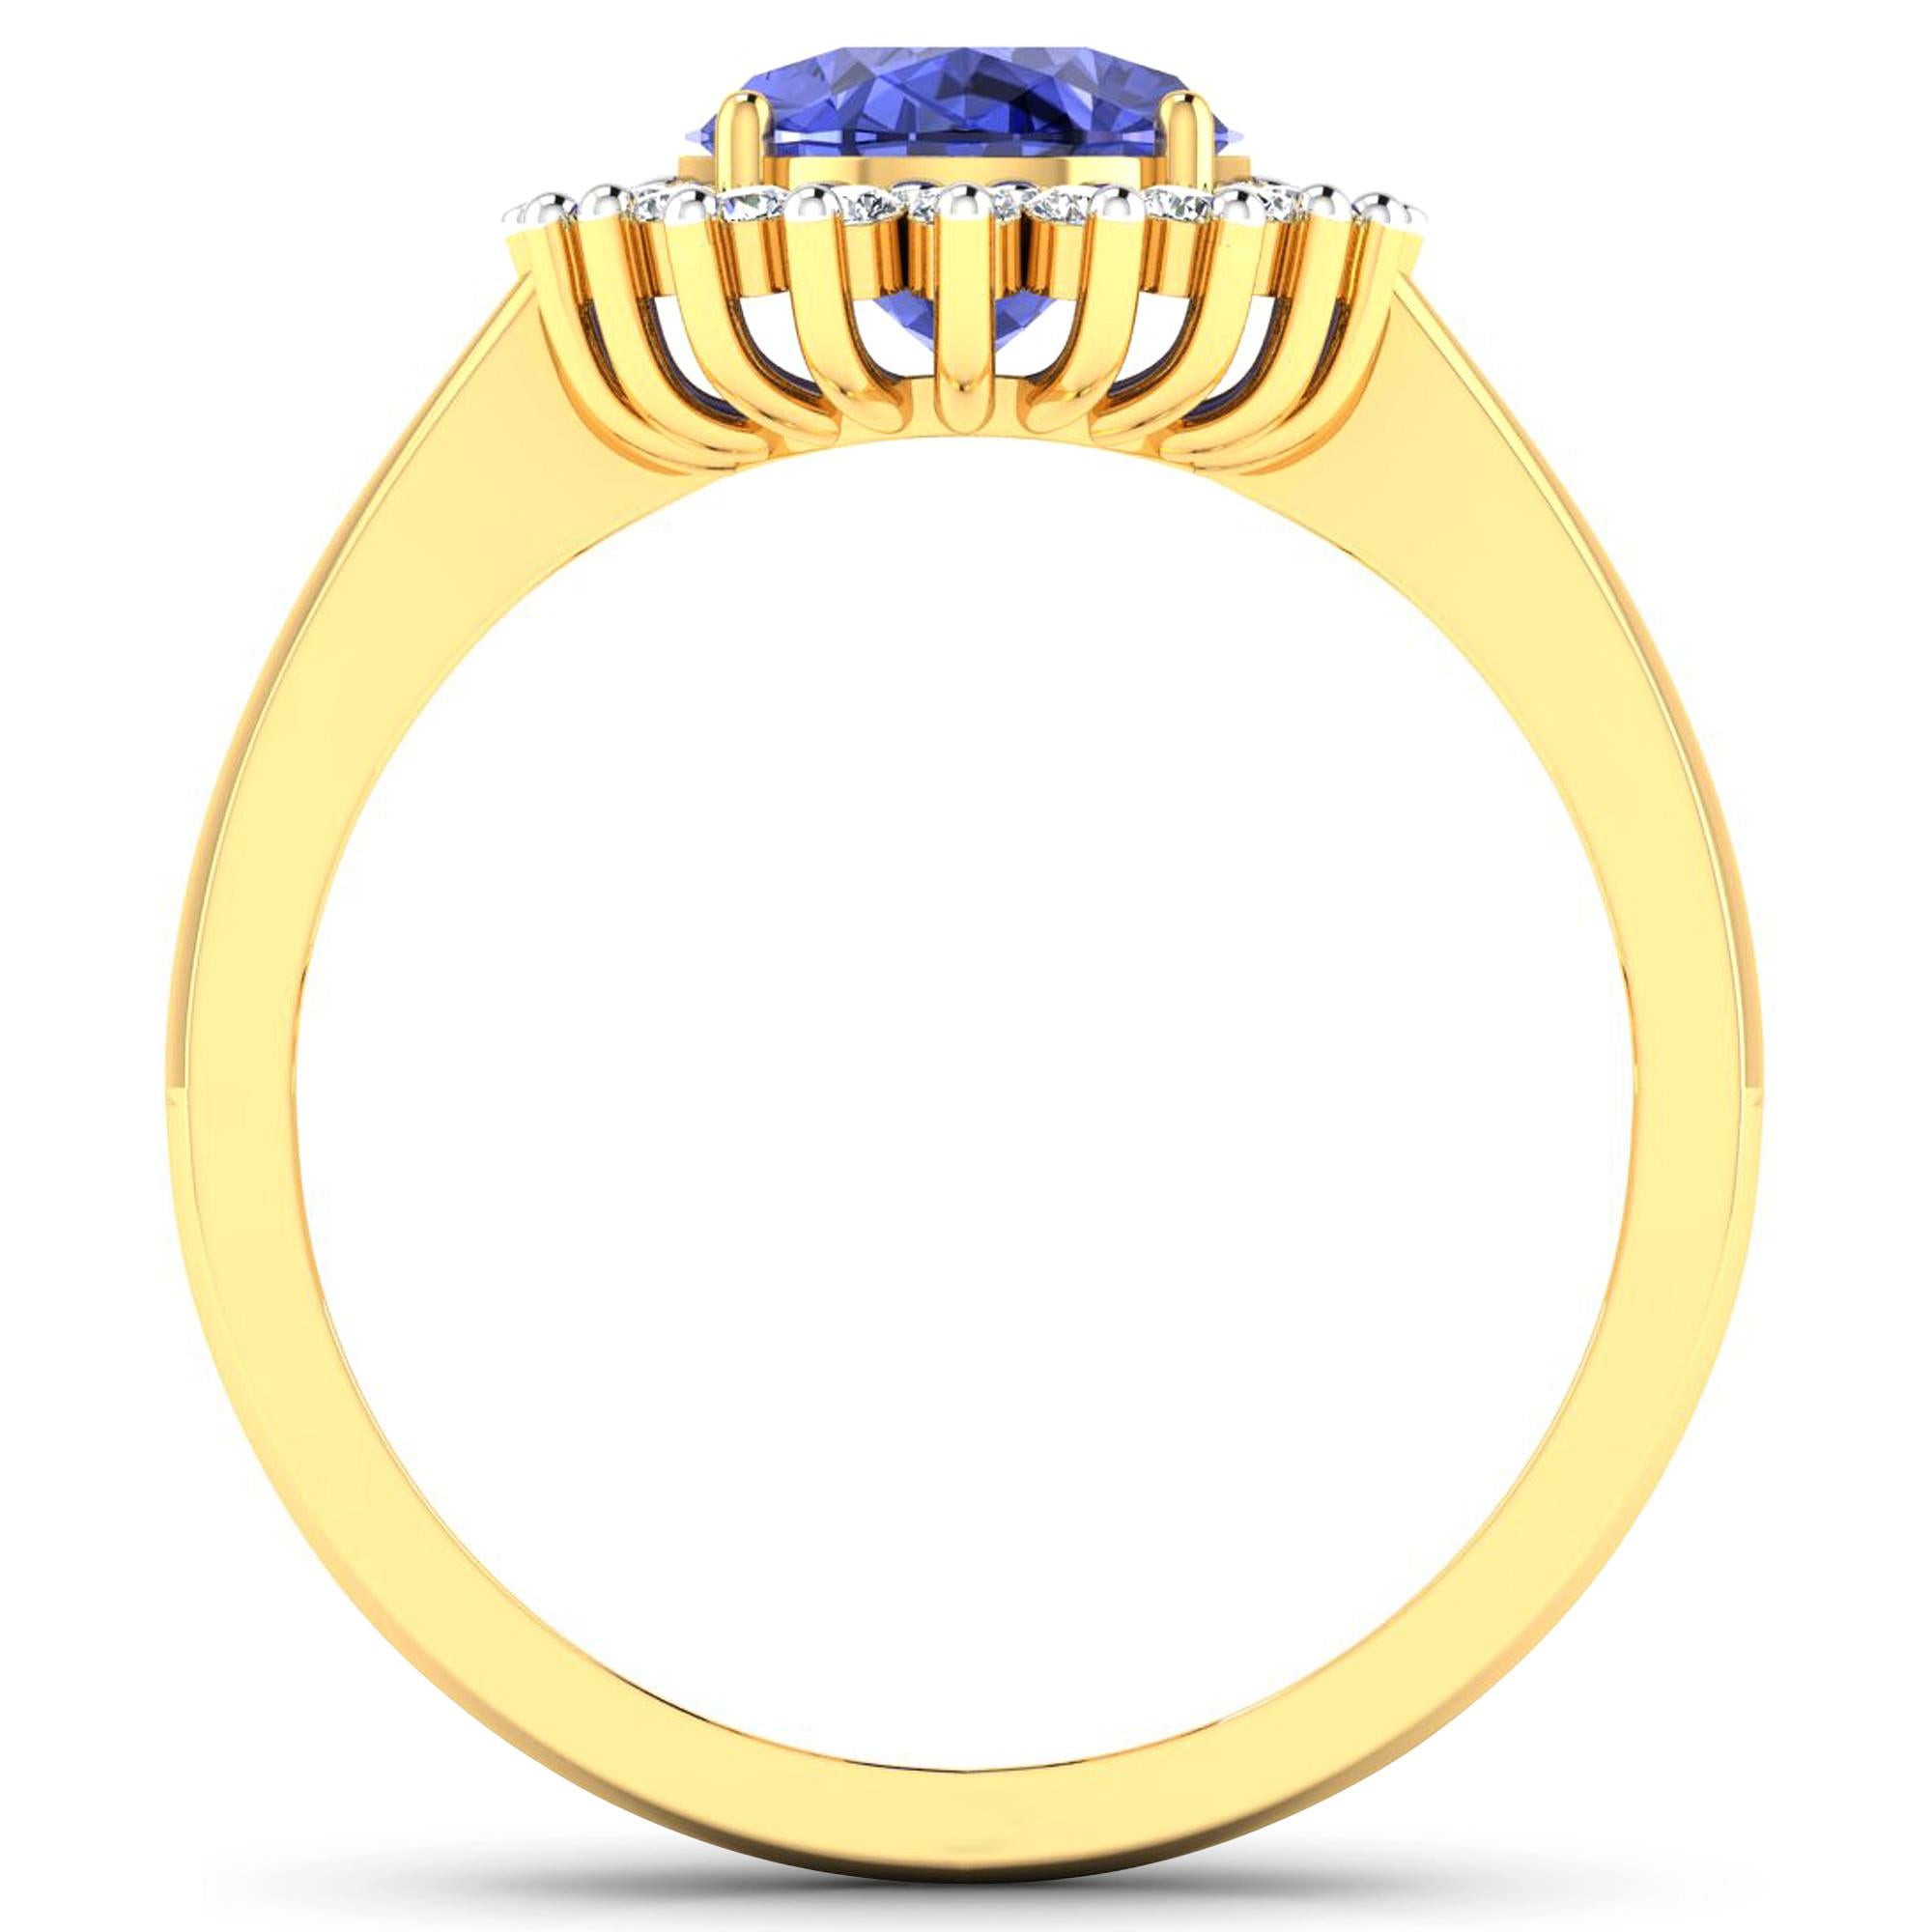 Tanzanite Gold Ring, 14Kt Gold Tanzanite & Diamond Engagement Ring, 1.34ctw.

Flaunt yourself with this 14K Yellow Gold Tanzanite & White Diamond Engagement Ring. The setting is inlaid with 17 accented full-cut White Diamond round stones for a total